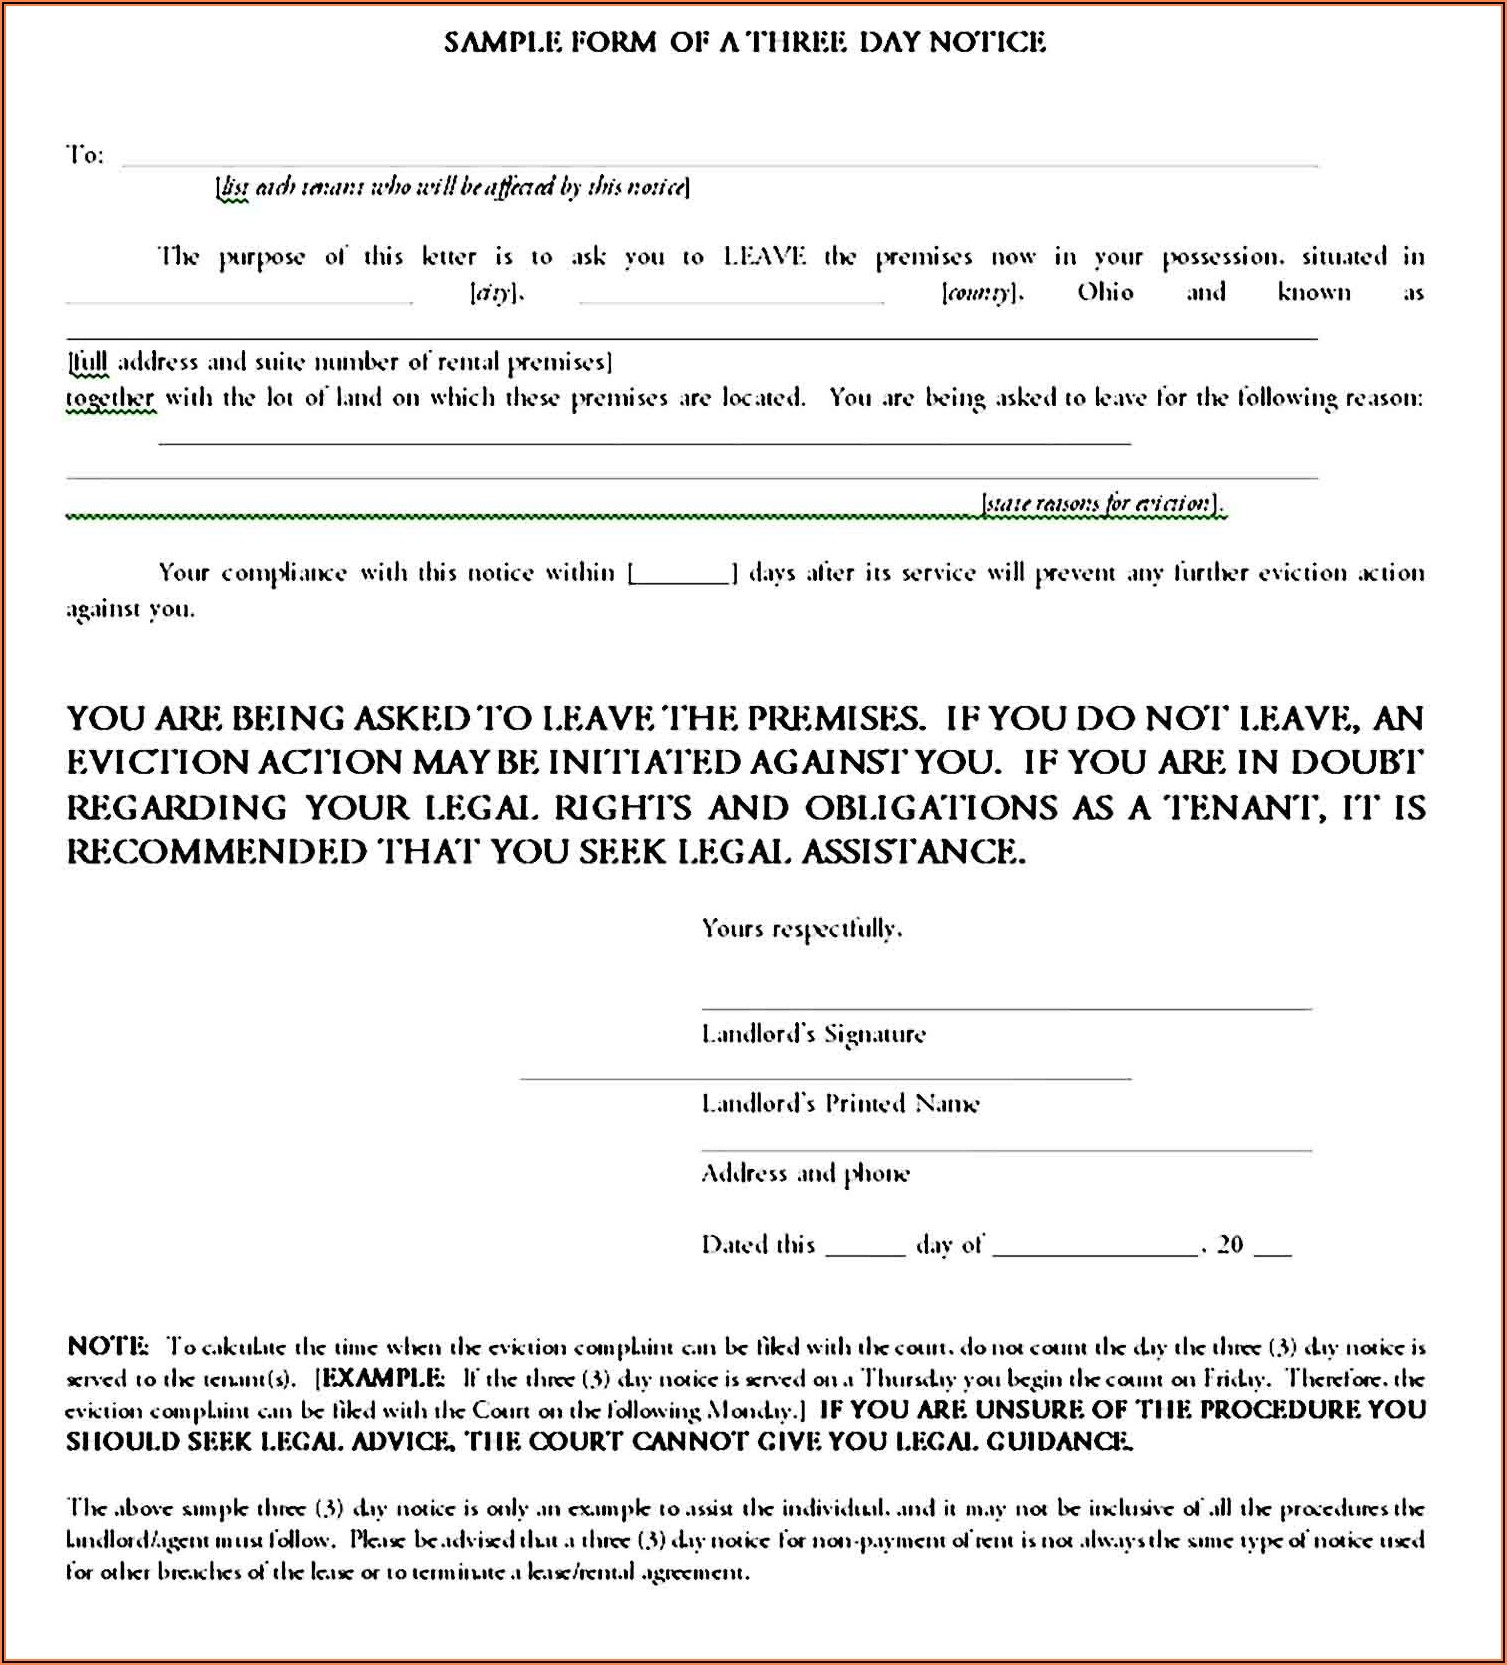 Landlord Eviction Notice Sample